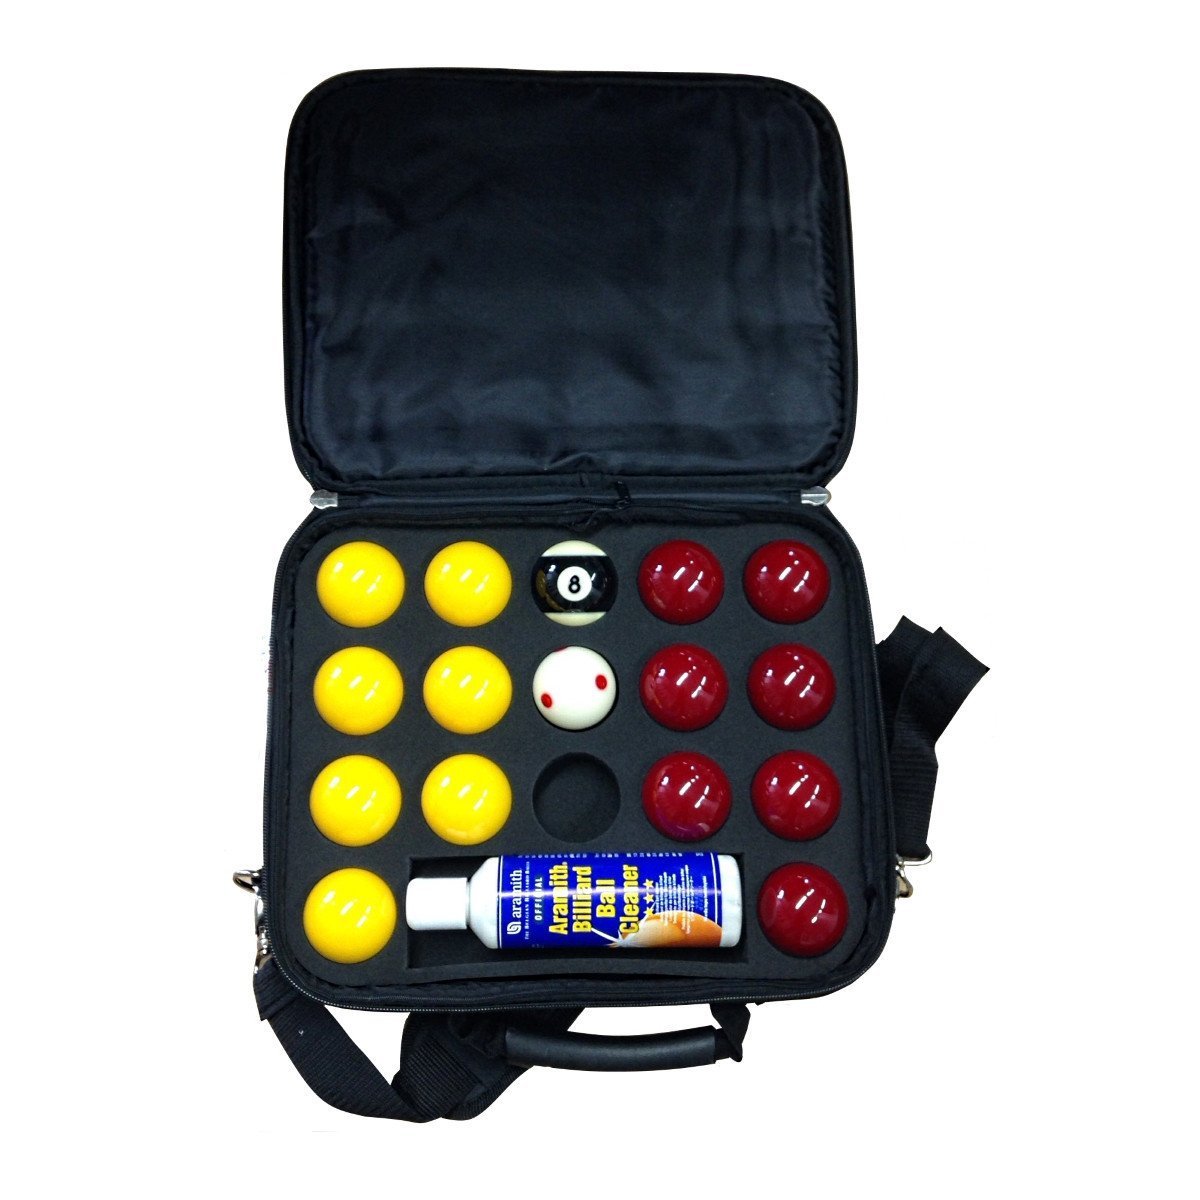 Image of Super Aramith Pro Cup 8-Ball Pool Balls and Case - 2" (51mm)